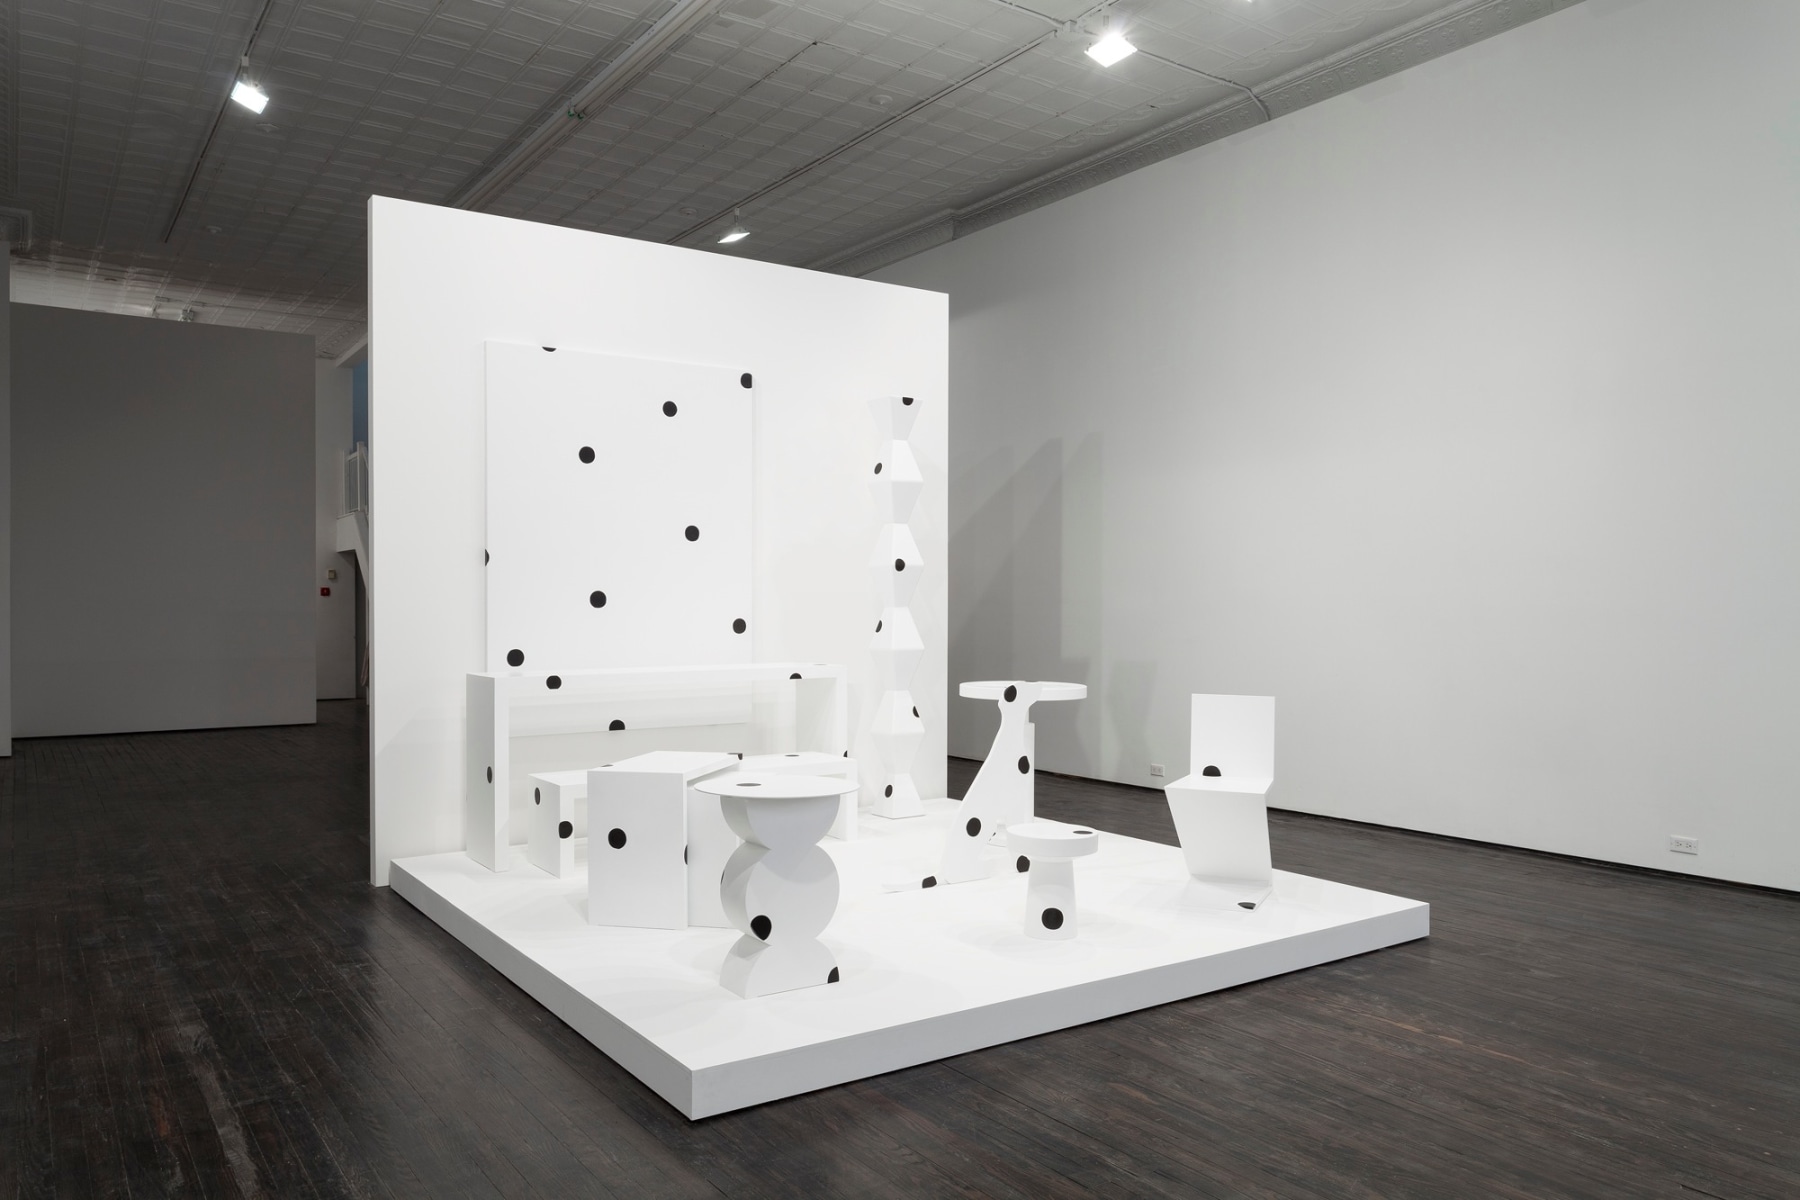 Side view of white abstract furniture, with black polka dots